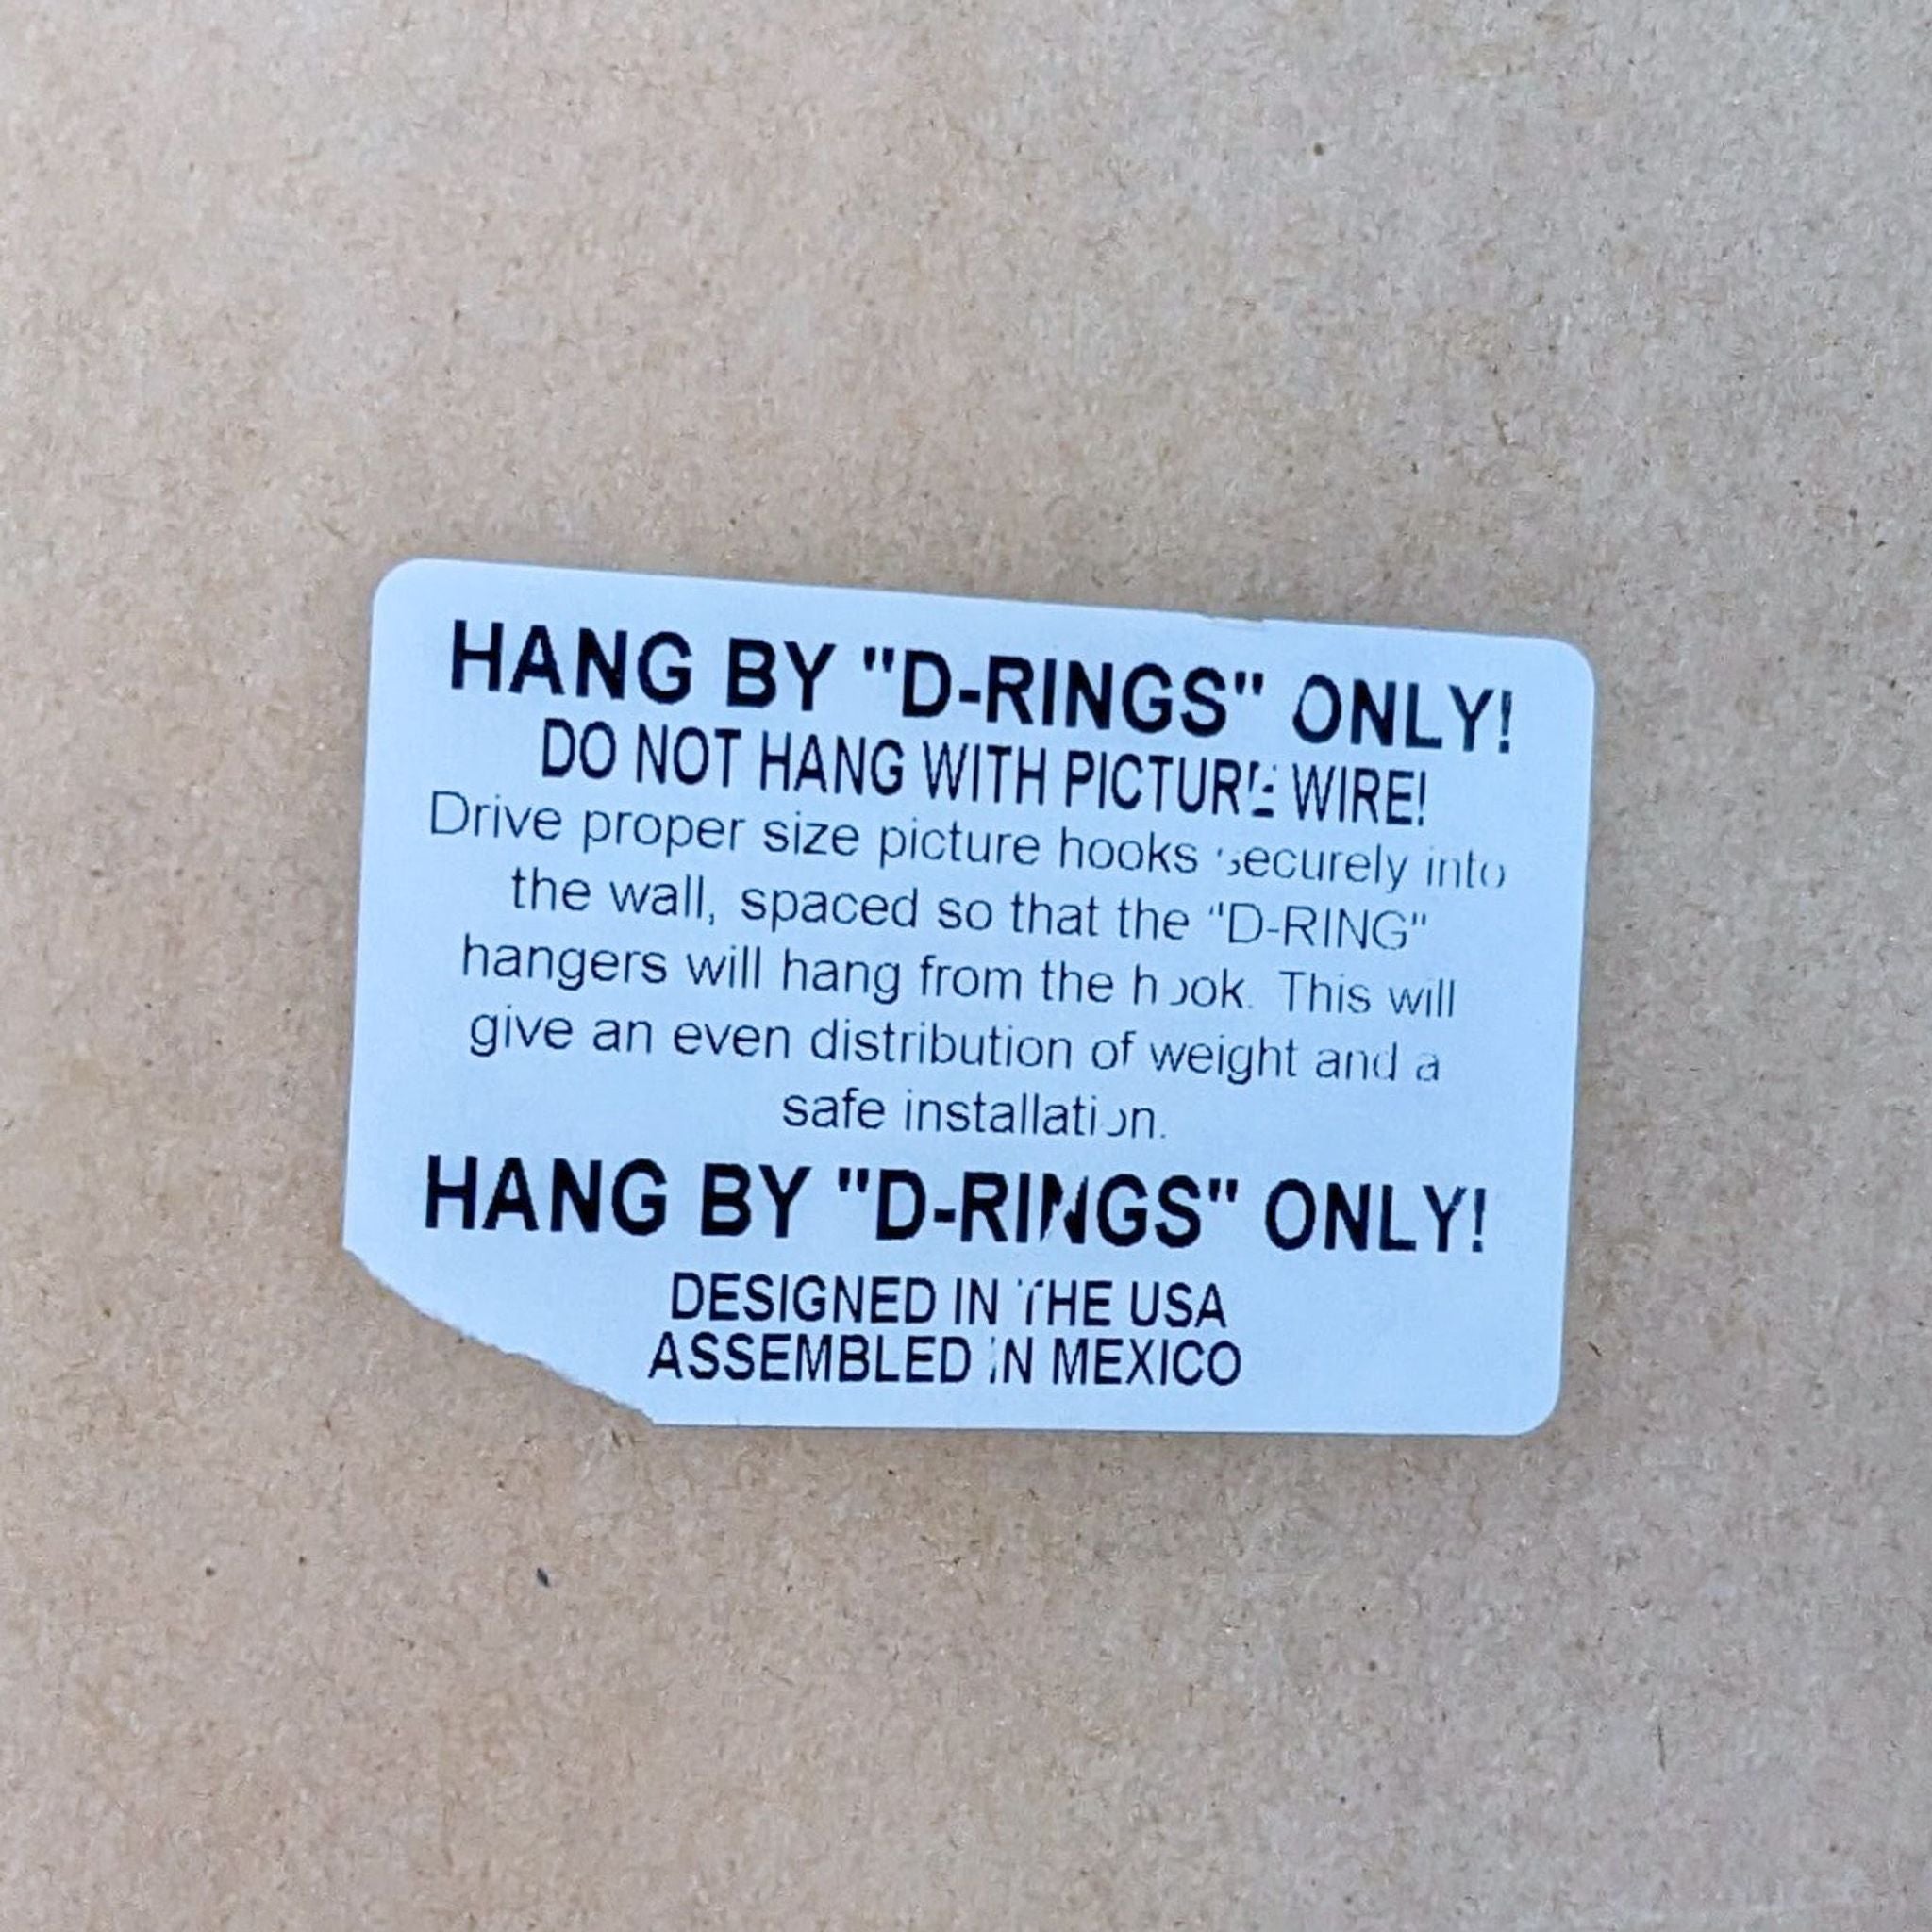 Instruction label for hanging a mirror with "D-RING" only, cautioning against using picture wire, on a cardboard background.